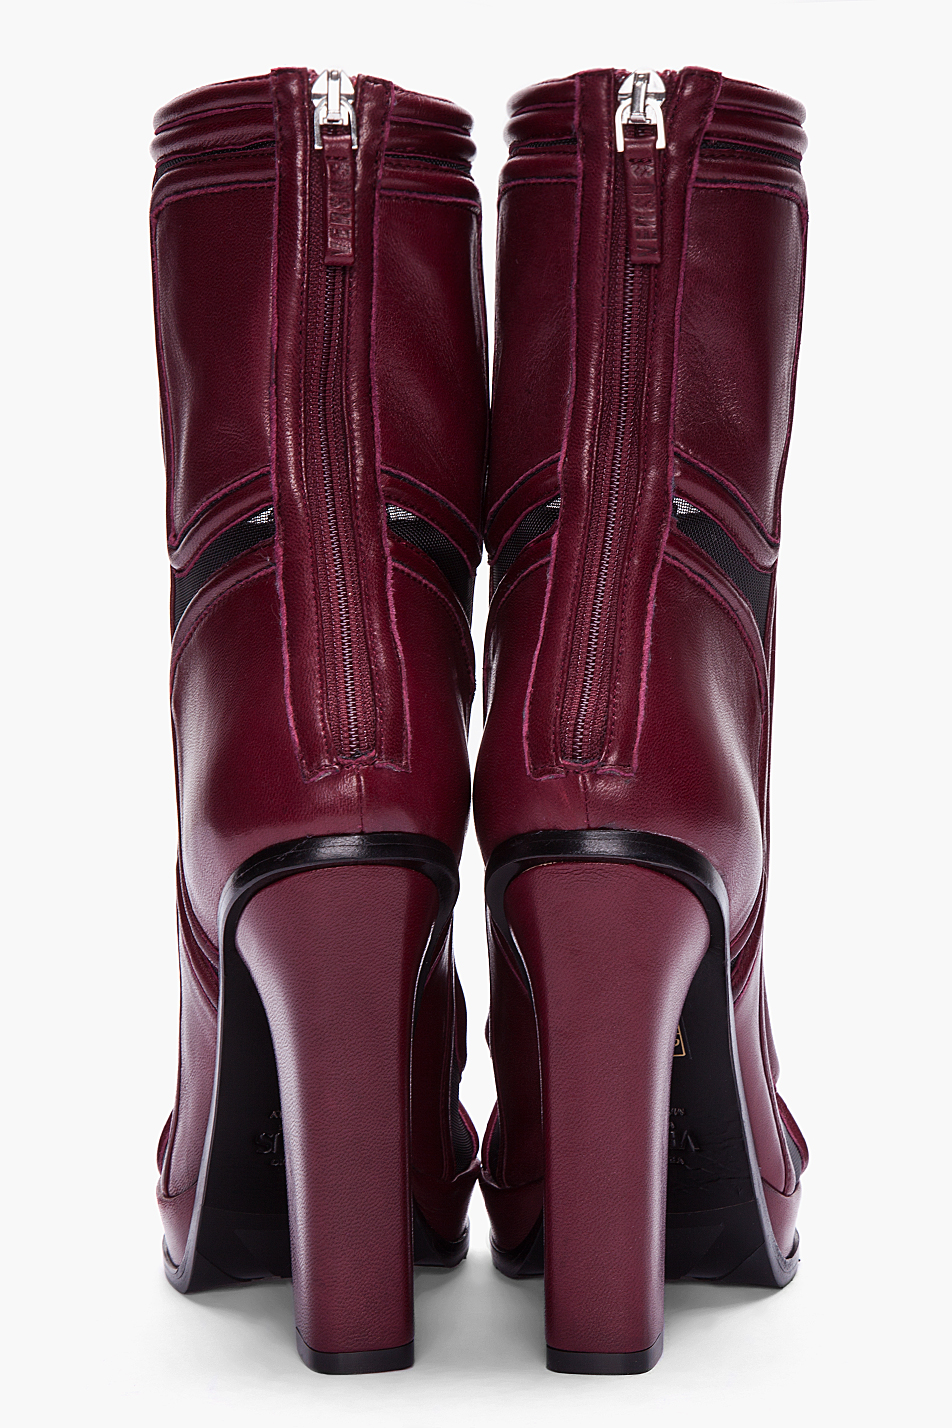 Lyst - Versus Burgundy Paneled Leather Ankle Boots